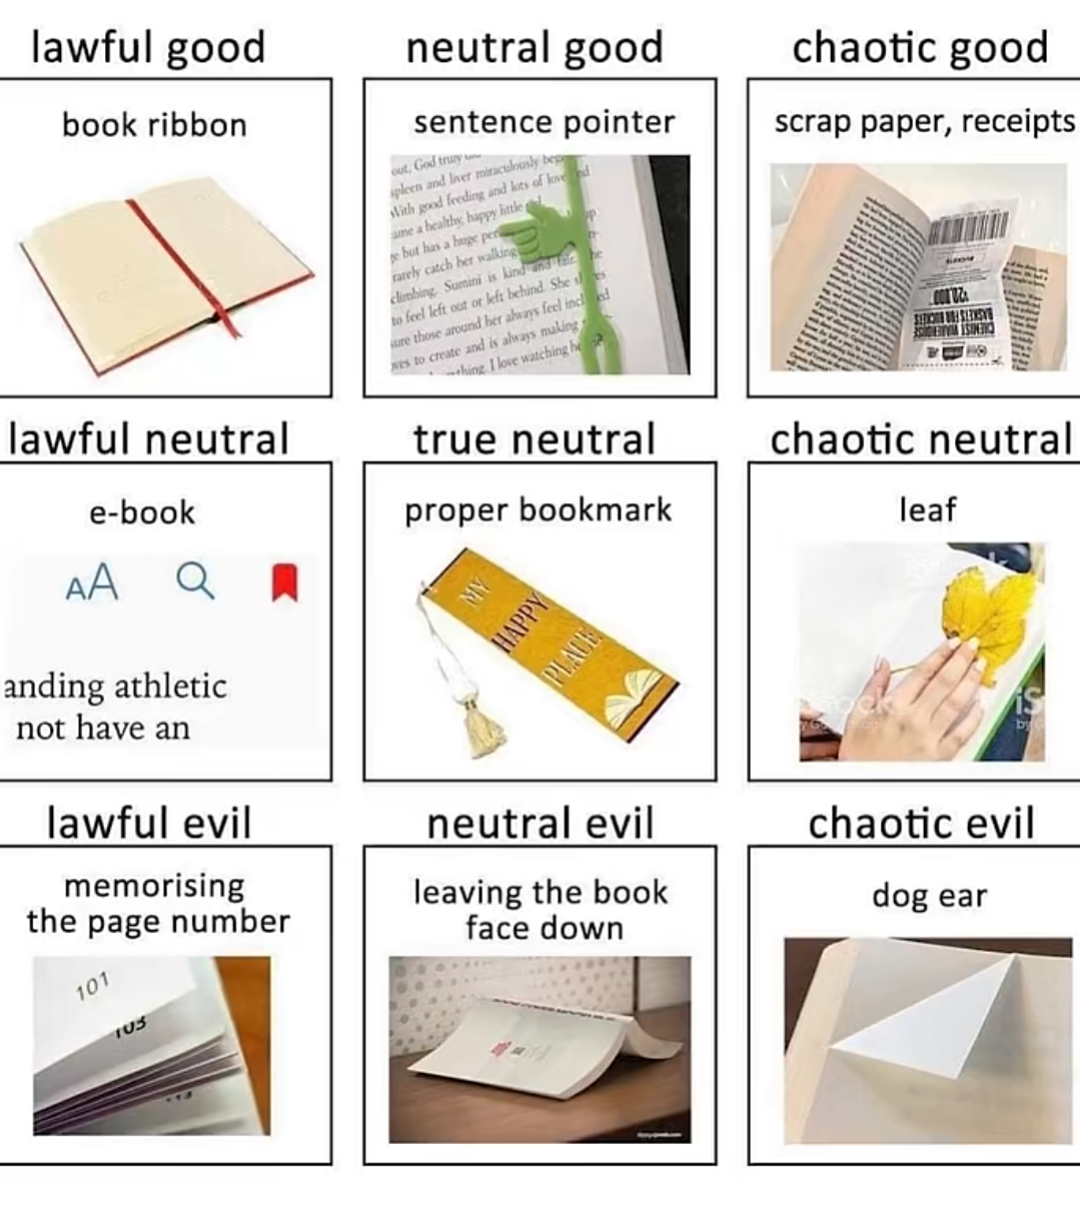 fresh memes --  alignment chart bookmarks - lawful good book ribbon lawful neutral ebook Aa Q anding athletic not have an lawful evil memorising the page number 101 neutral good sentence pointer true neutral proper bookmark AddVH neutral evil leaving the 